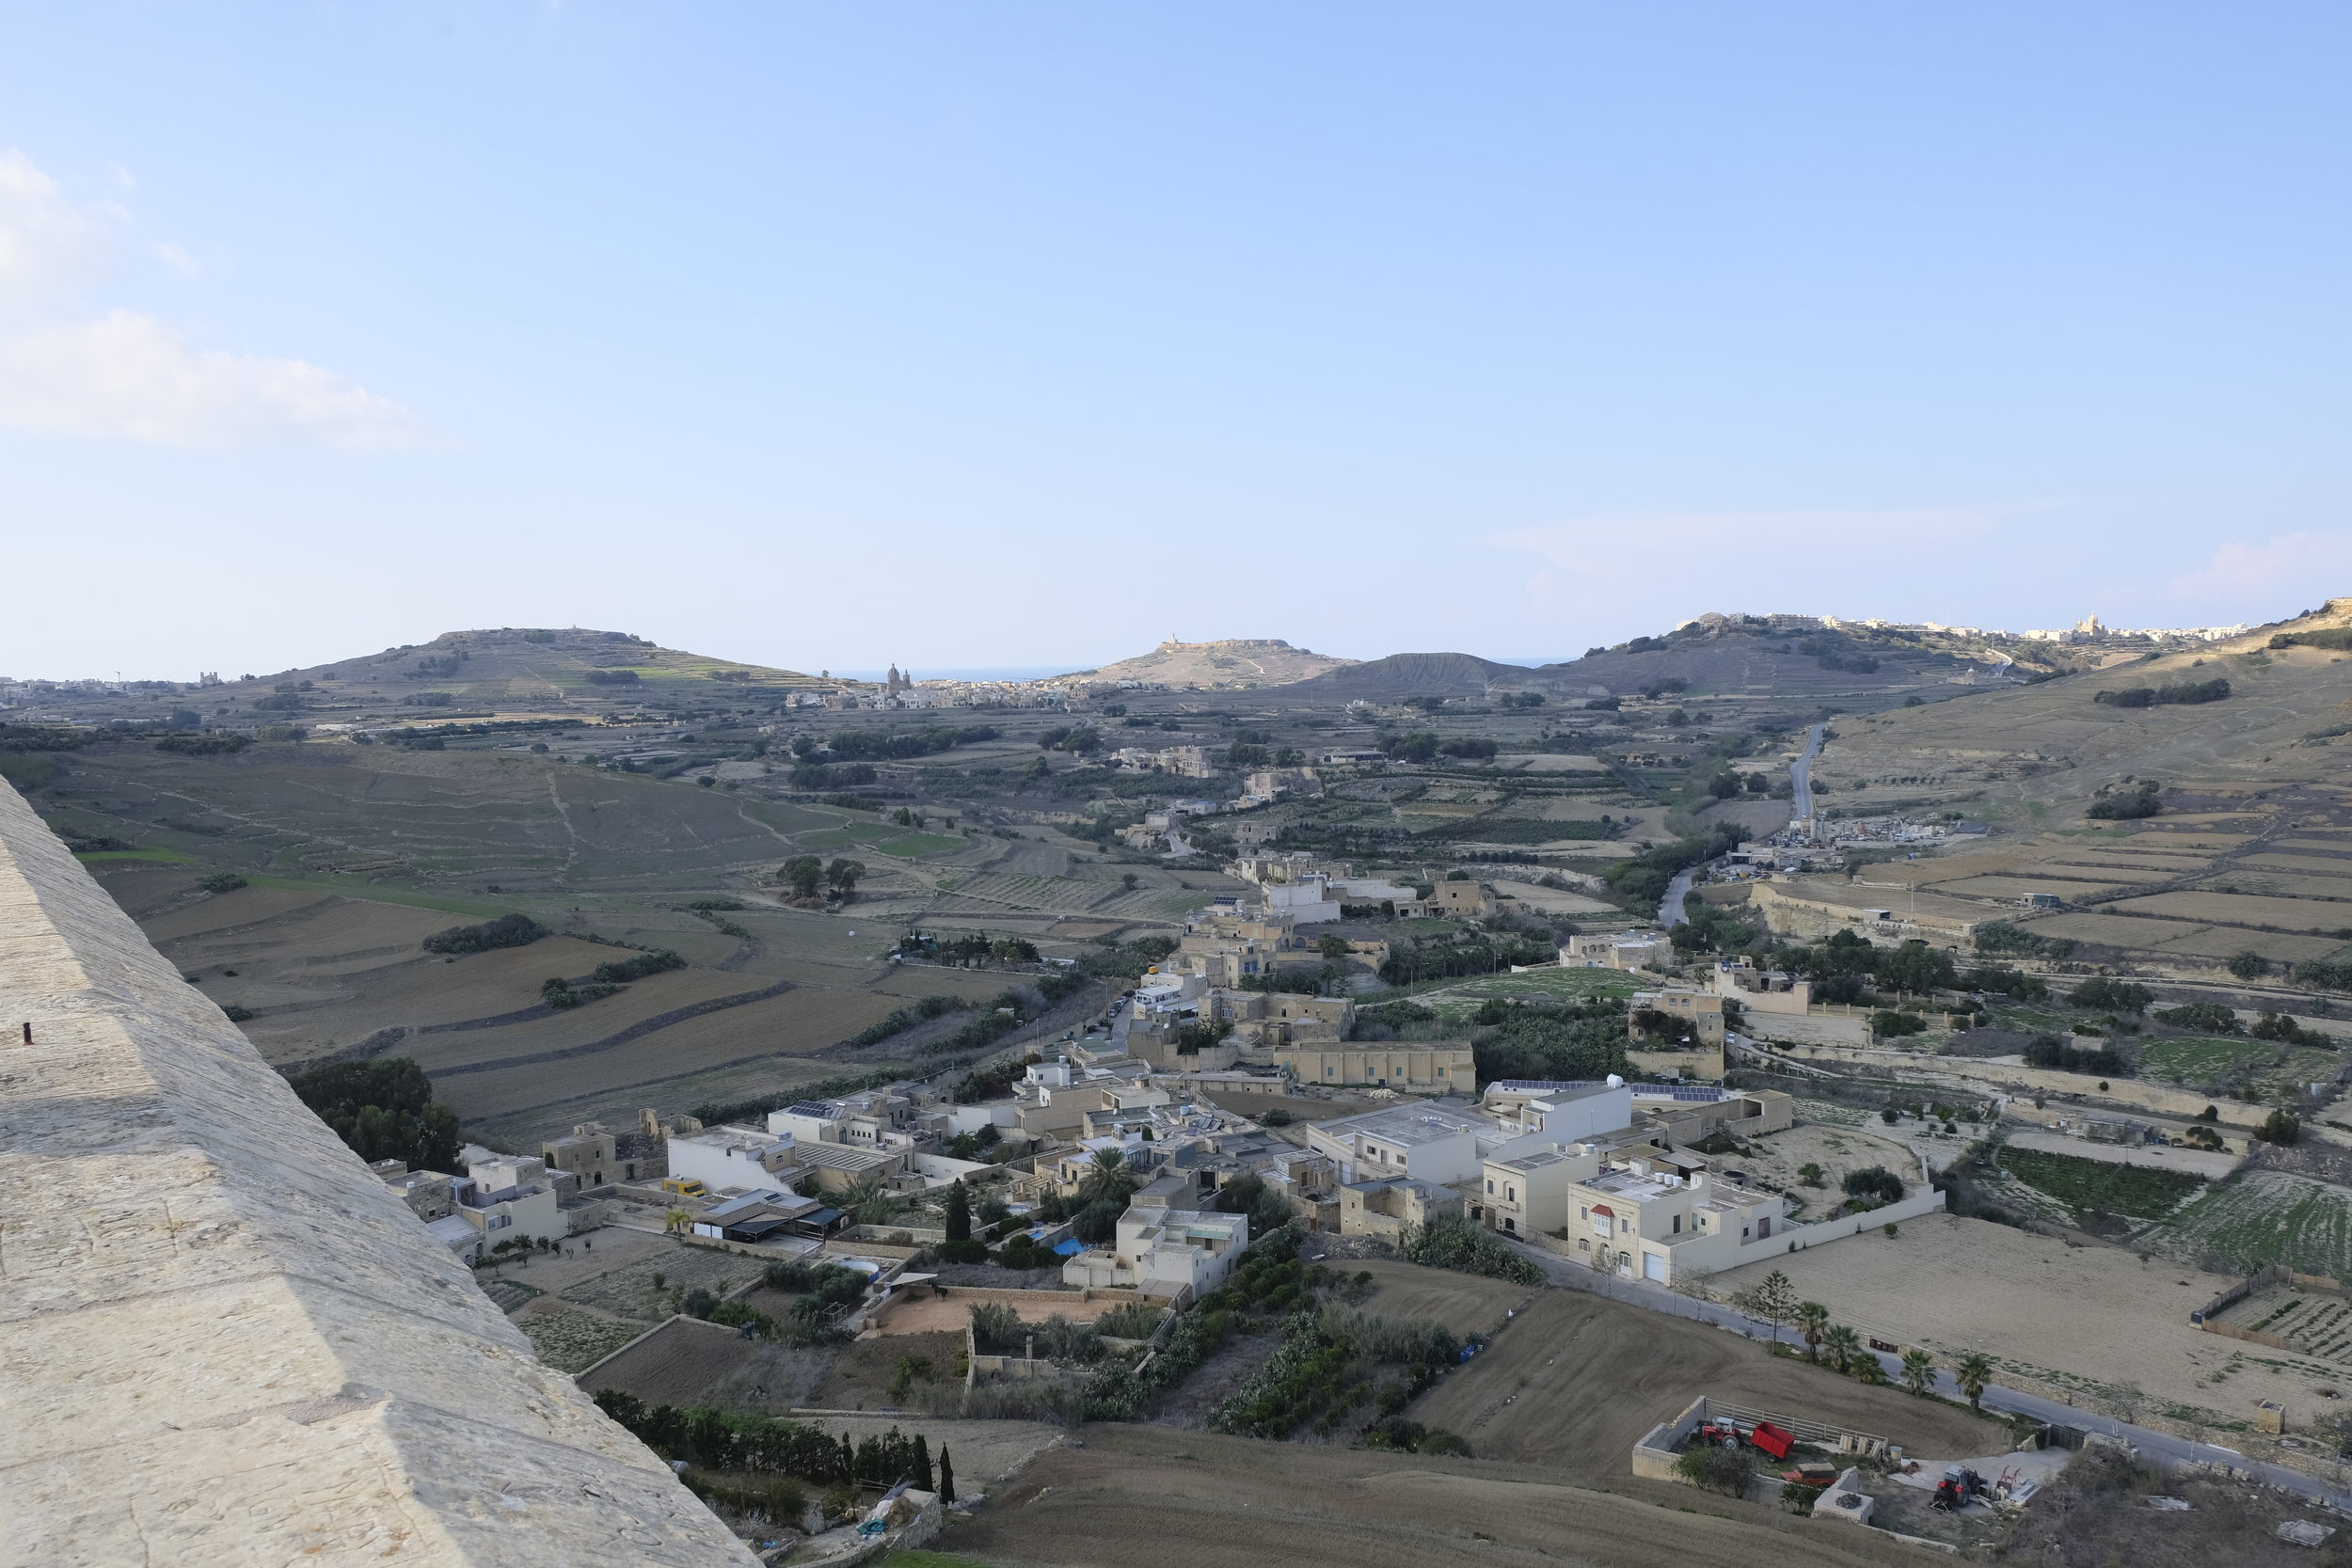 A view from Gozo's Cittadella, showing agricultural land in the foreground